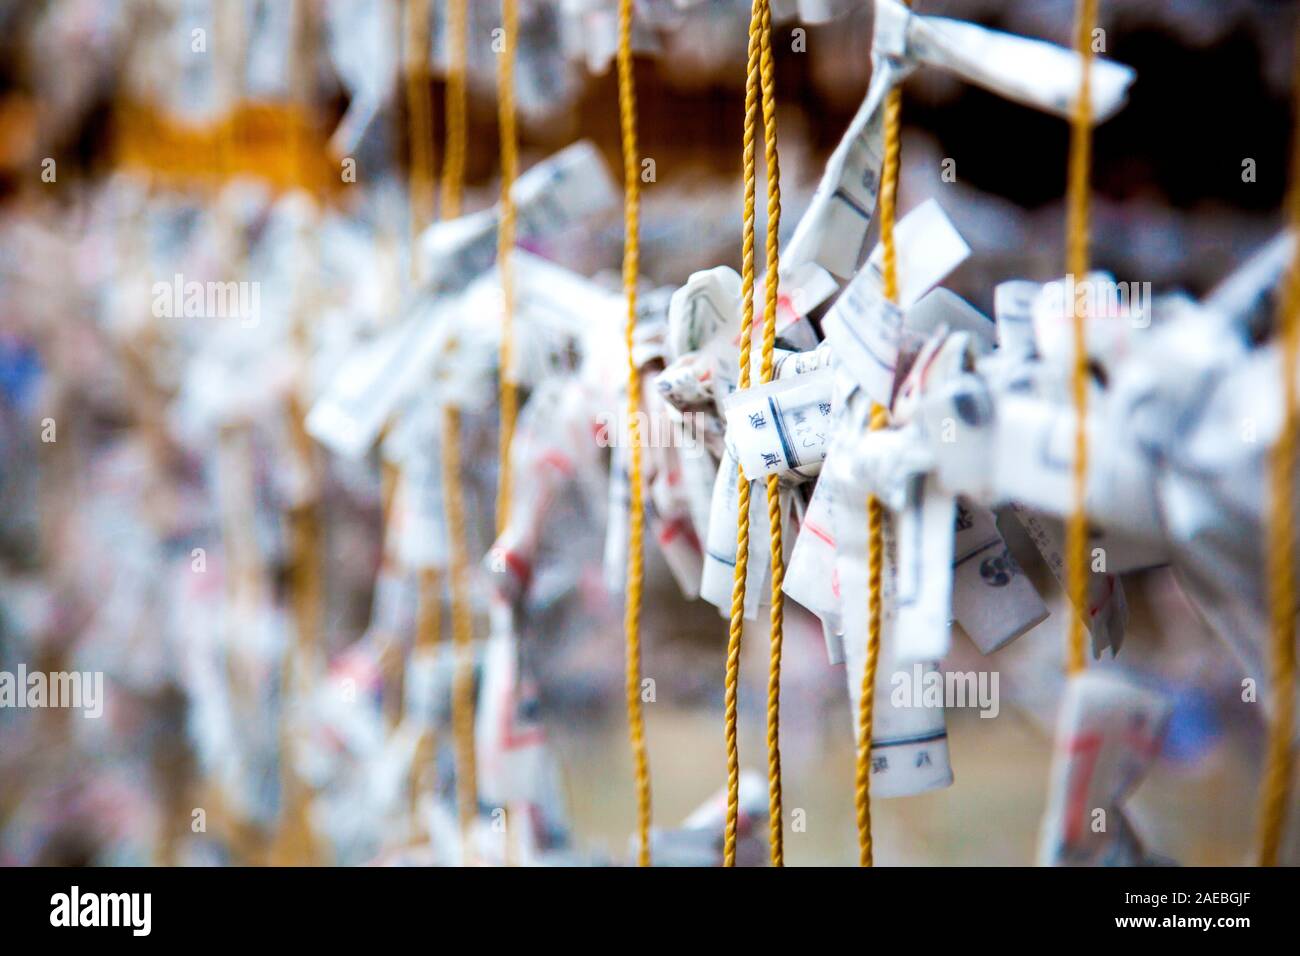 Paper prayers and wishes tied to a rope at the Yasaka Shrine in Kyoto, Kansai, Japan Stock Photo